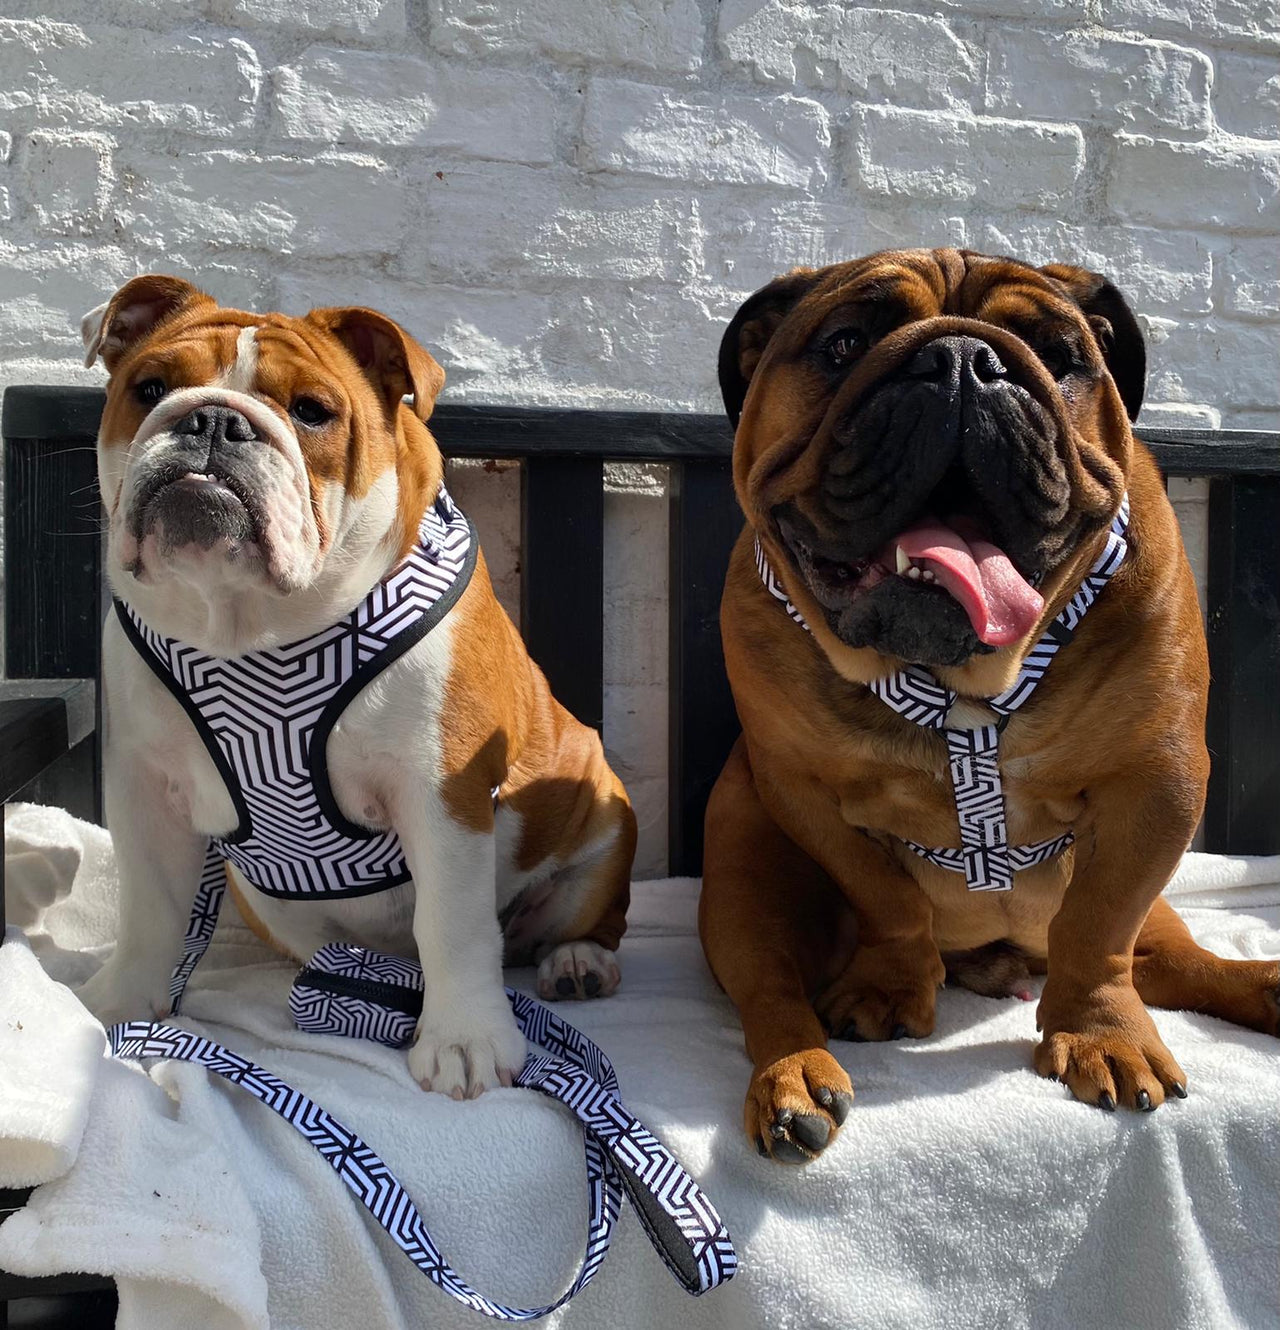 Two Bulldogs wearing TopDog Harnesses Its Just an Illusion Adjustable Dog Harness sitting on a bench